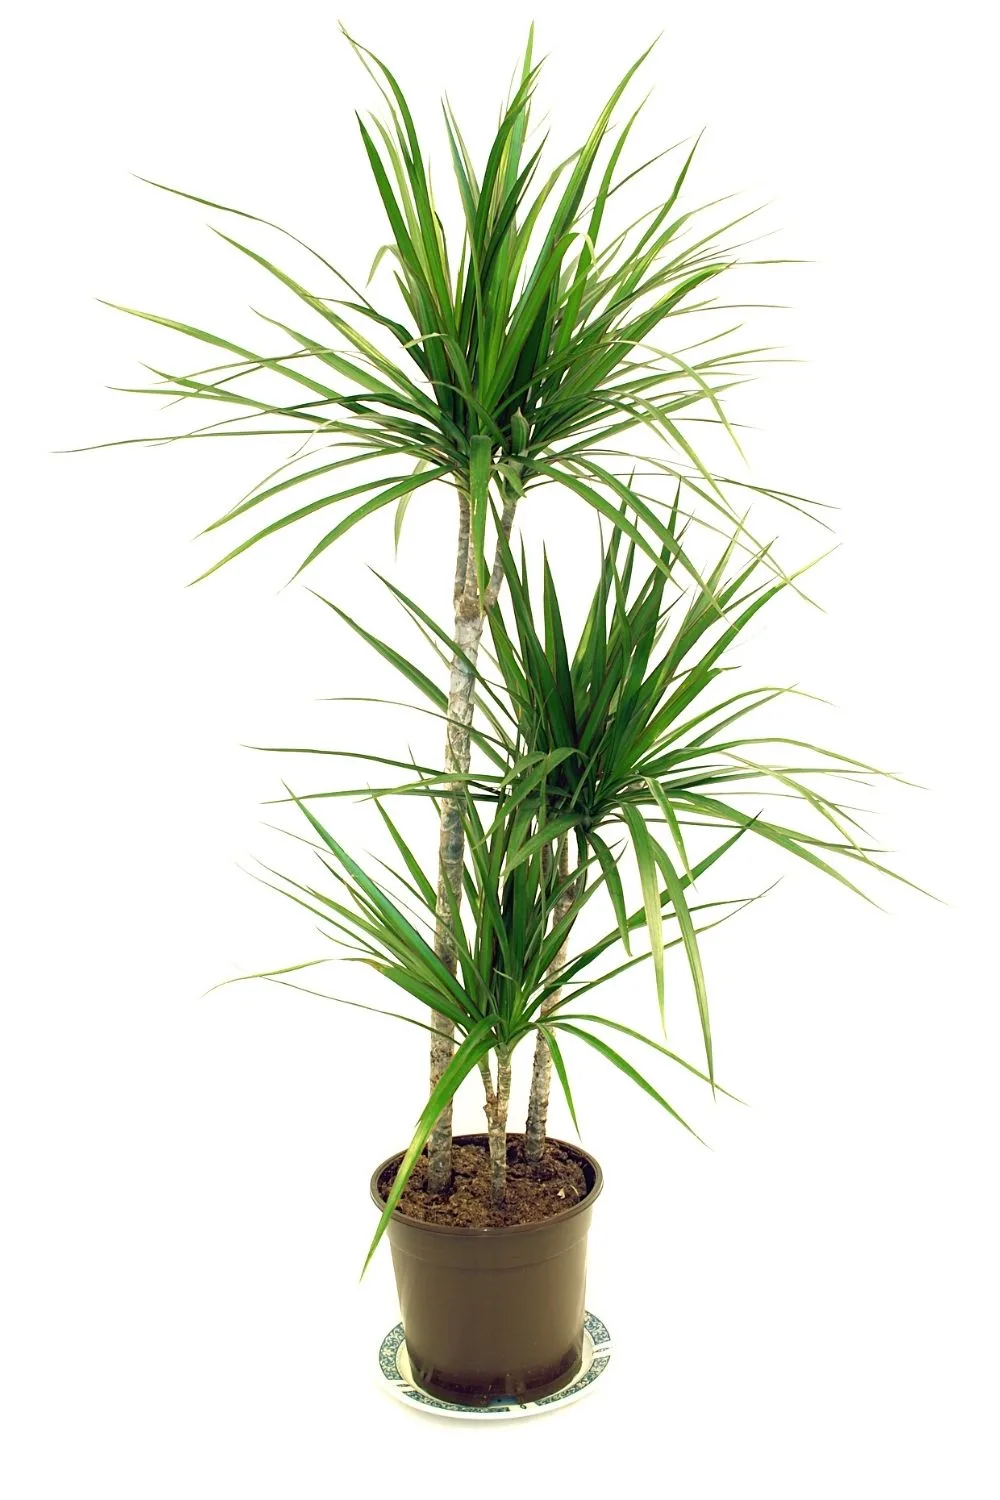 Though the Dragon Tree is a drought-resitant plant, it grows well in water